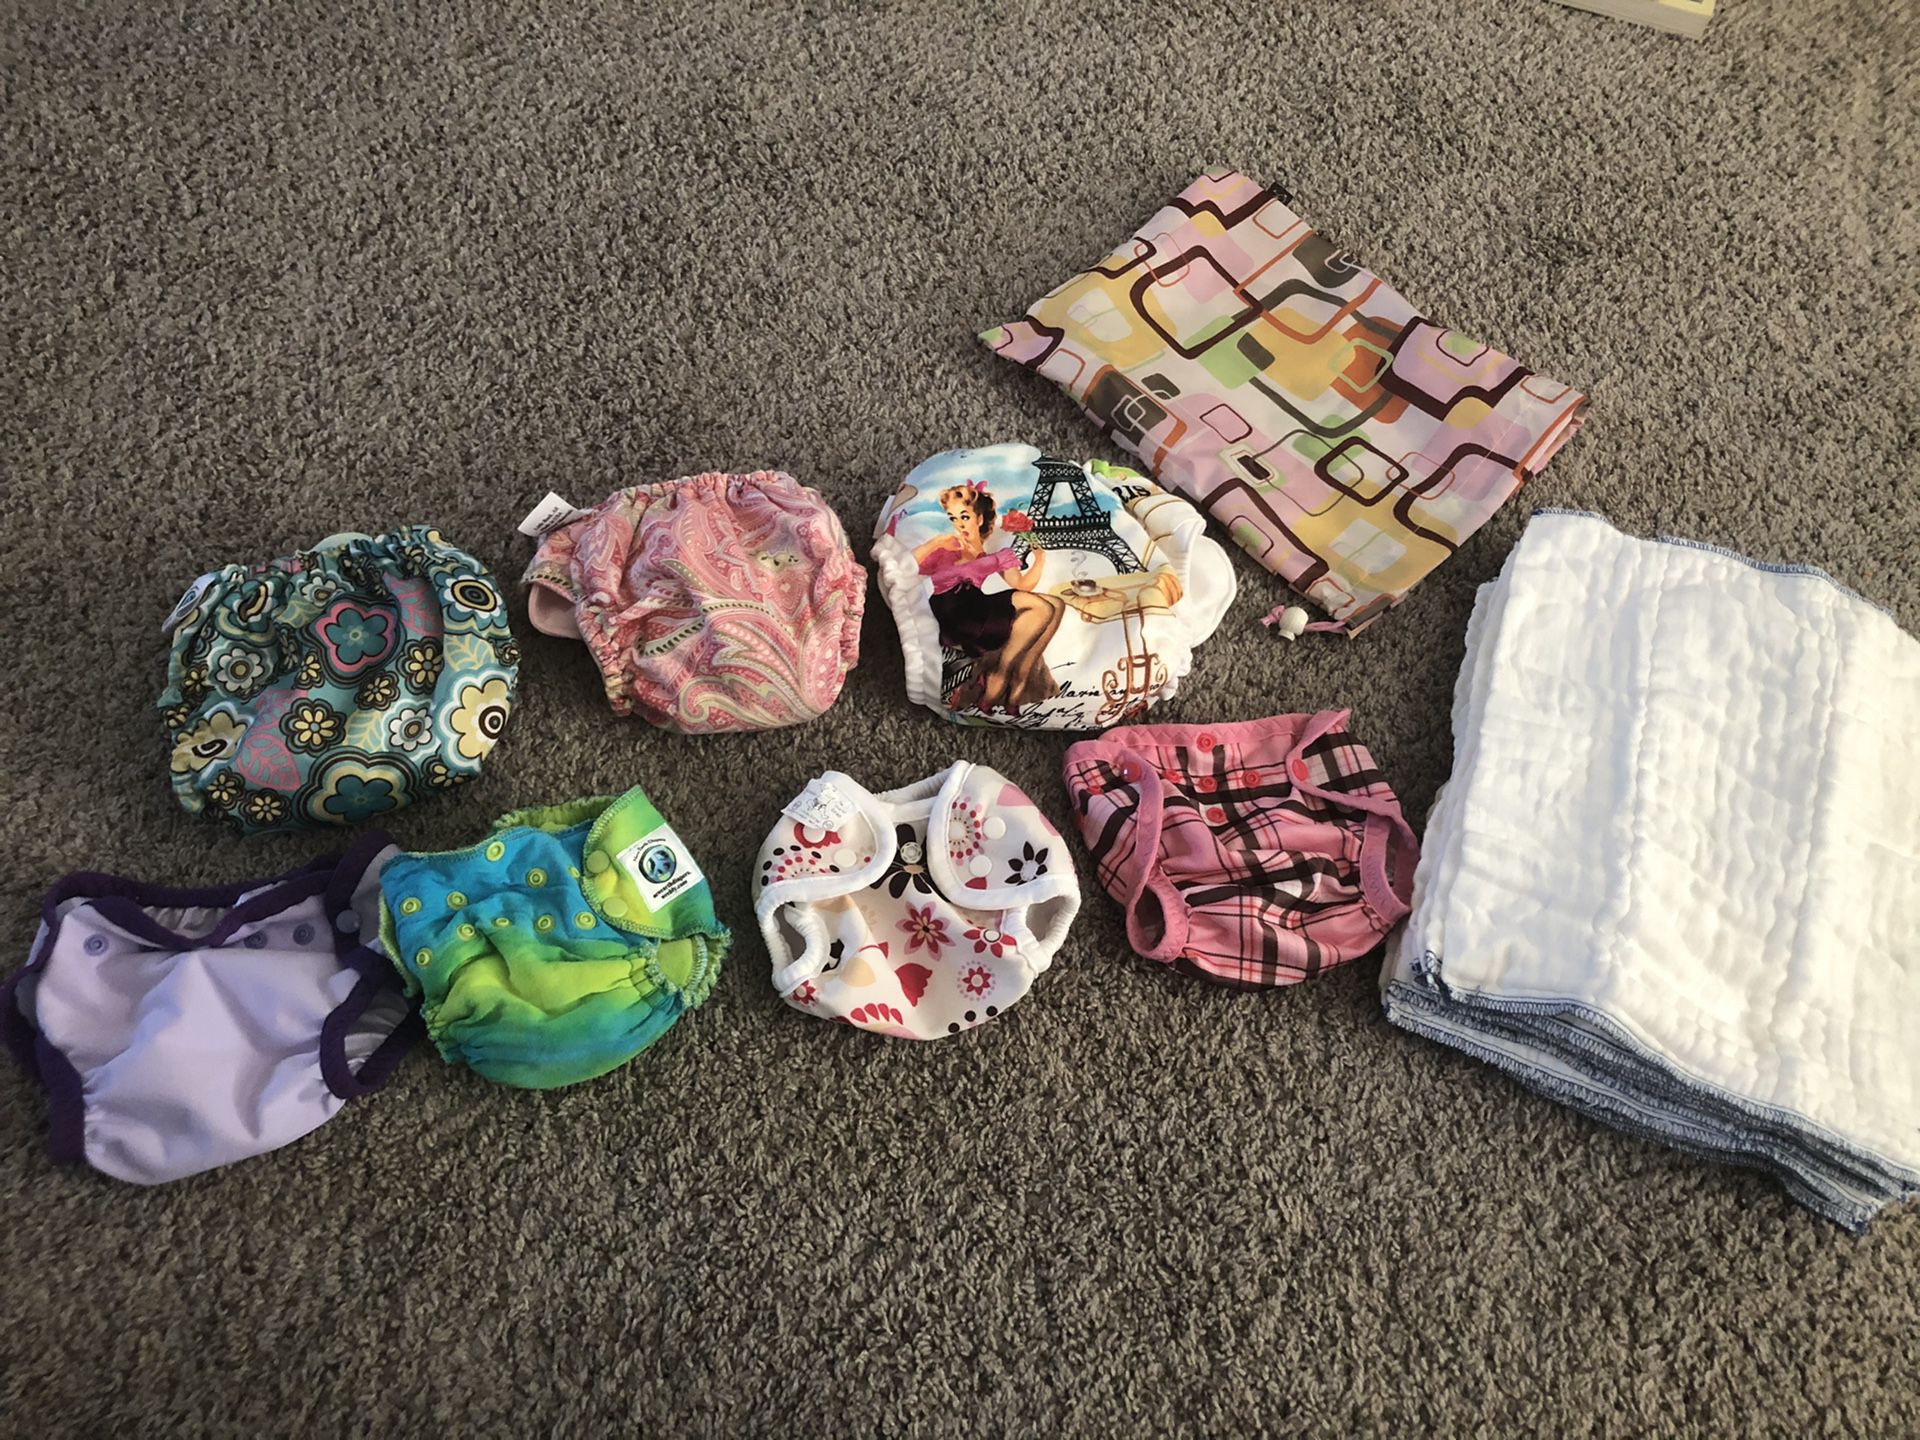 CLOTH DIAPERS SIZE NEWBORN/INFANT